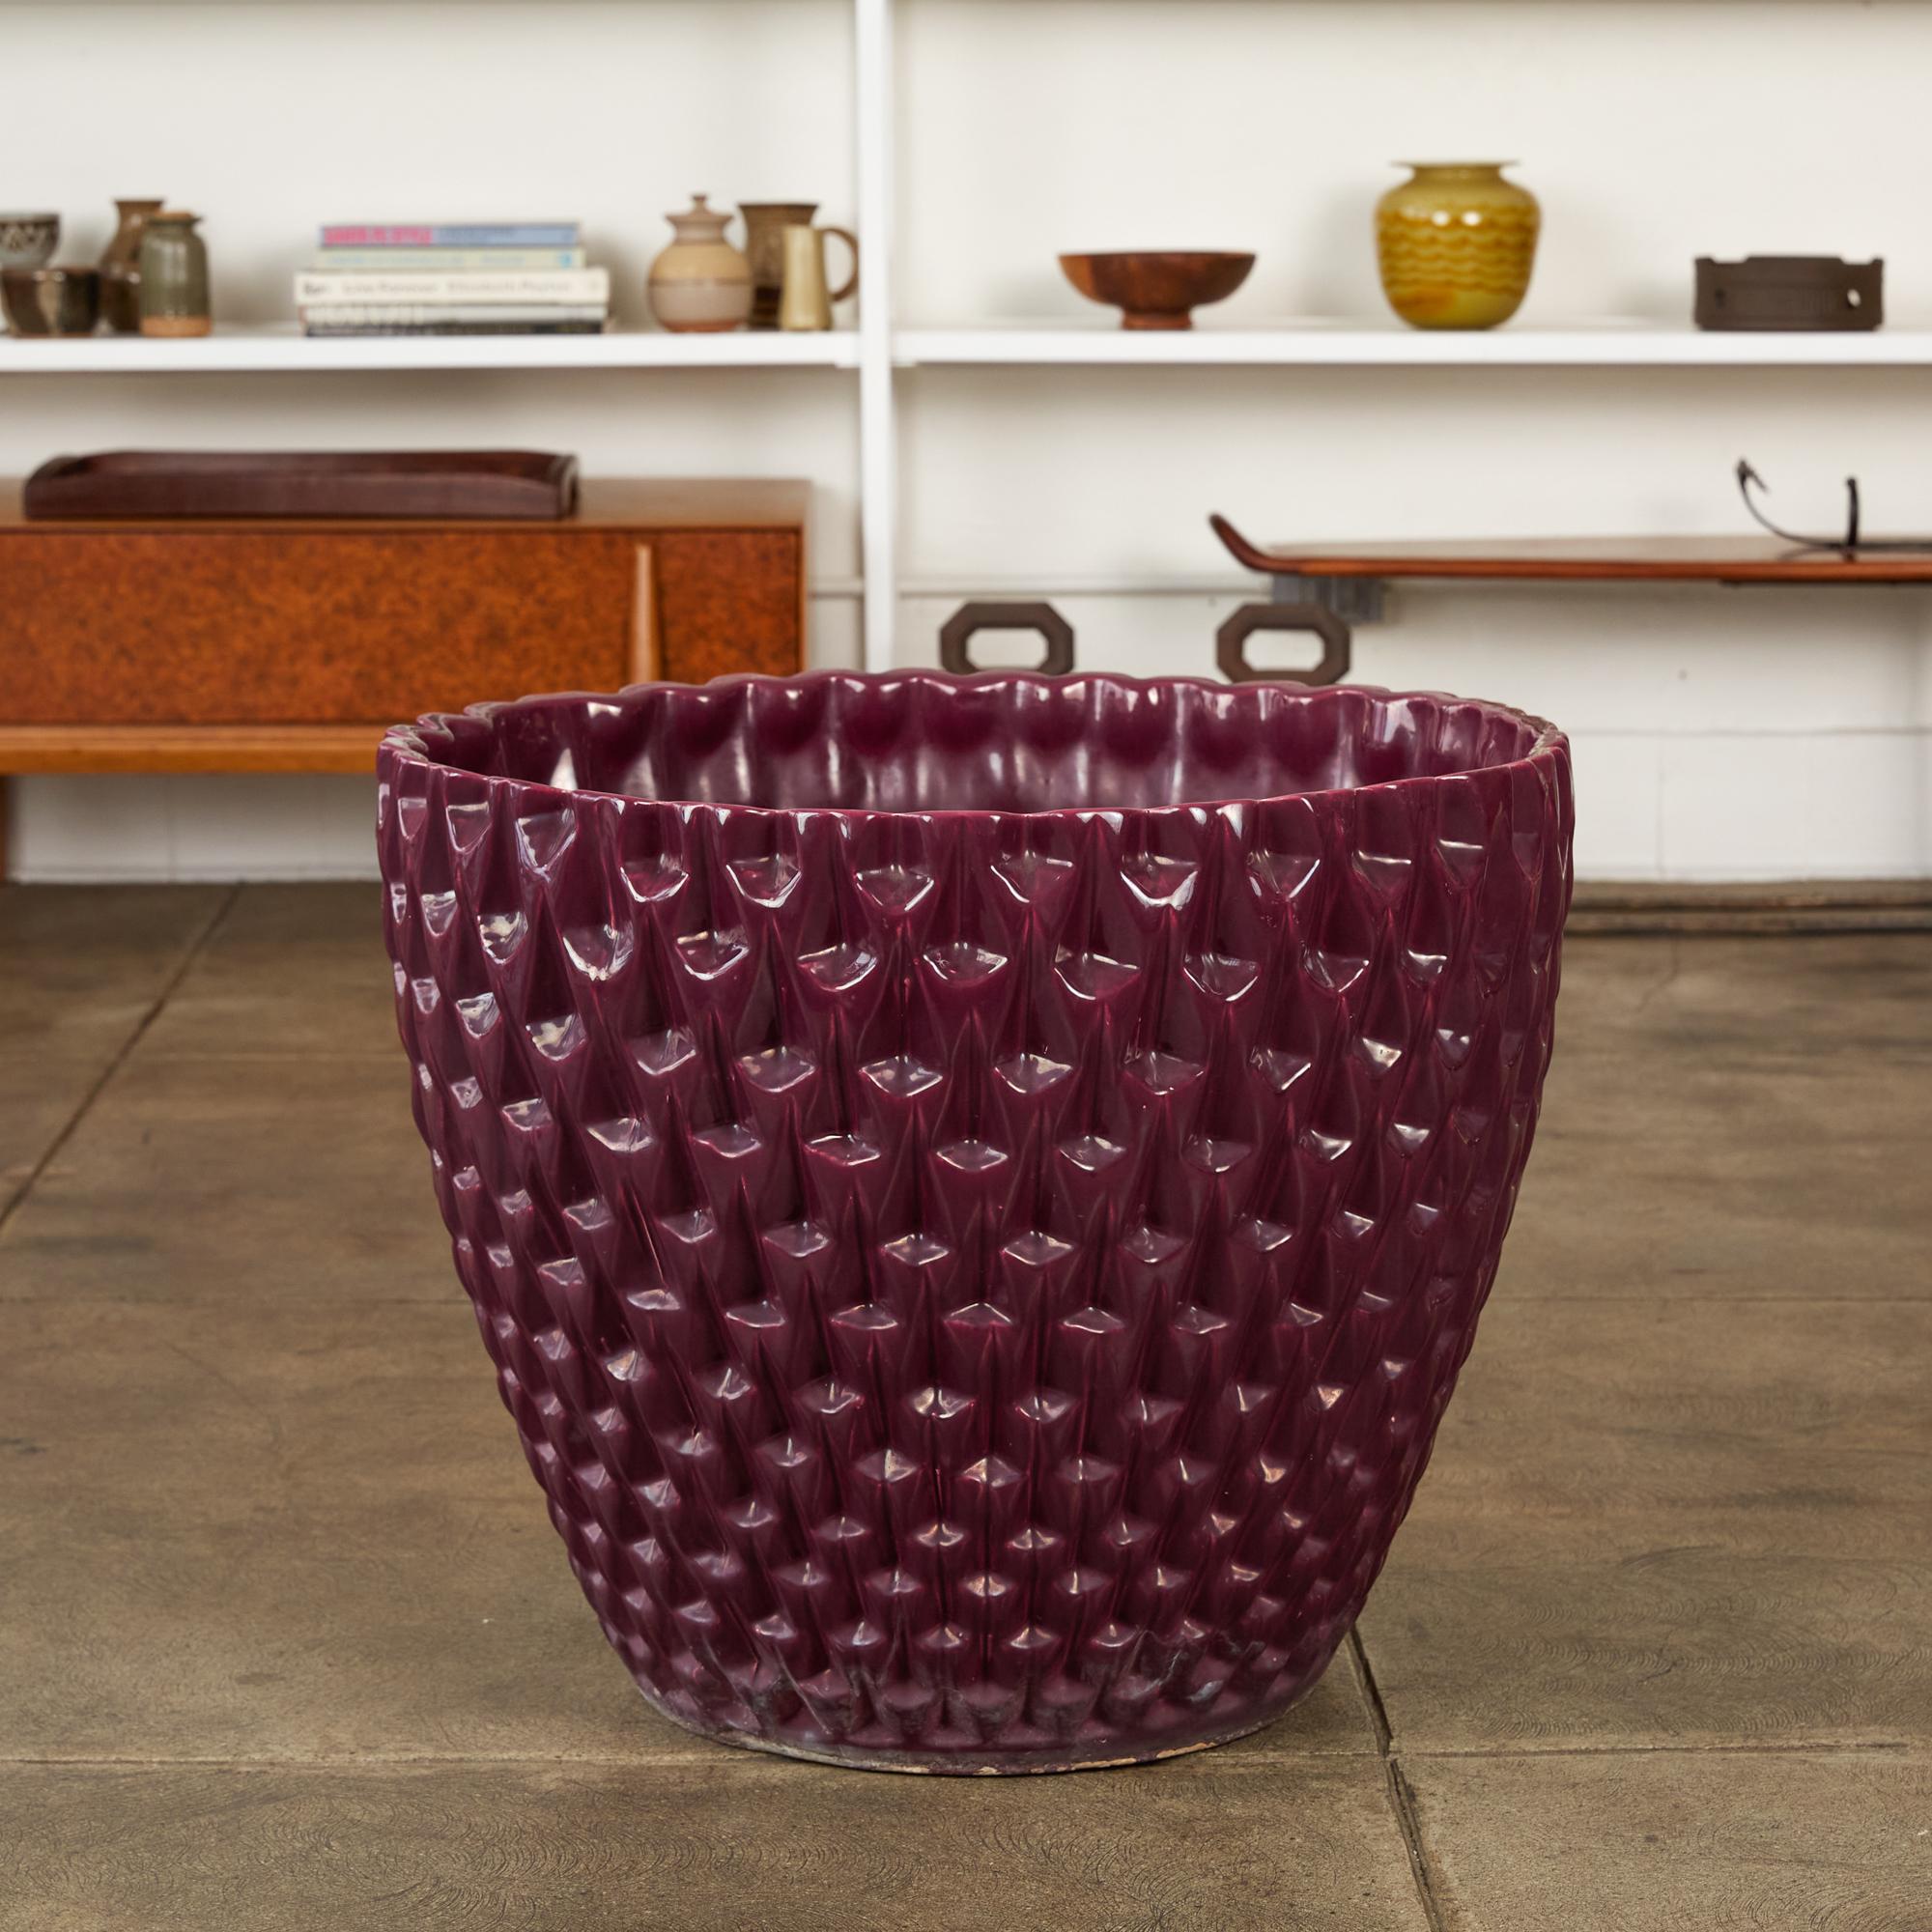 Designed by David Cressey in 1963 as part of the Pro/Artisan stoneware collection for Architectural Pottery, the slipcast Phoenix planter has a bowl shape with an allover geometric relief. This example is has an eggplant purple glaze with a glossy